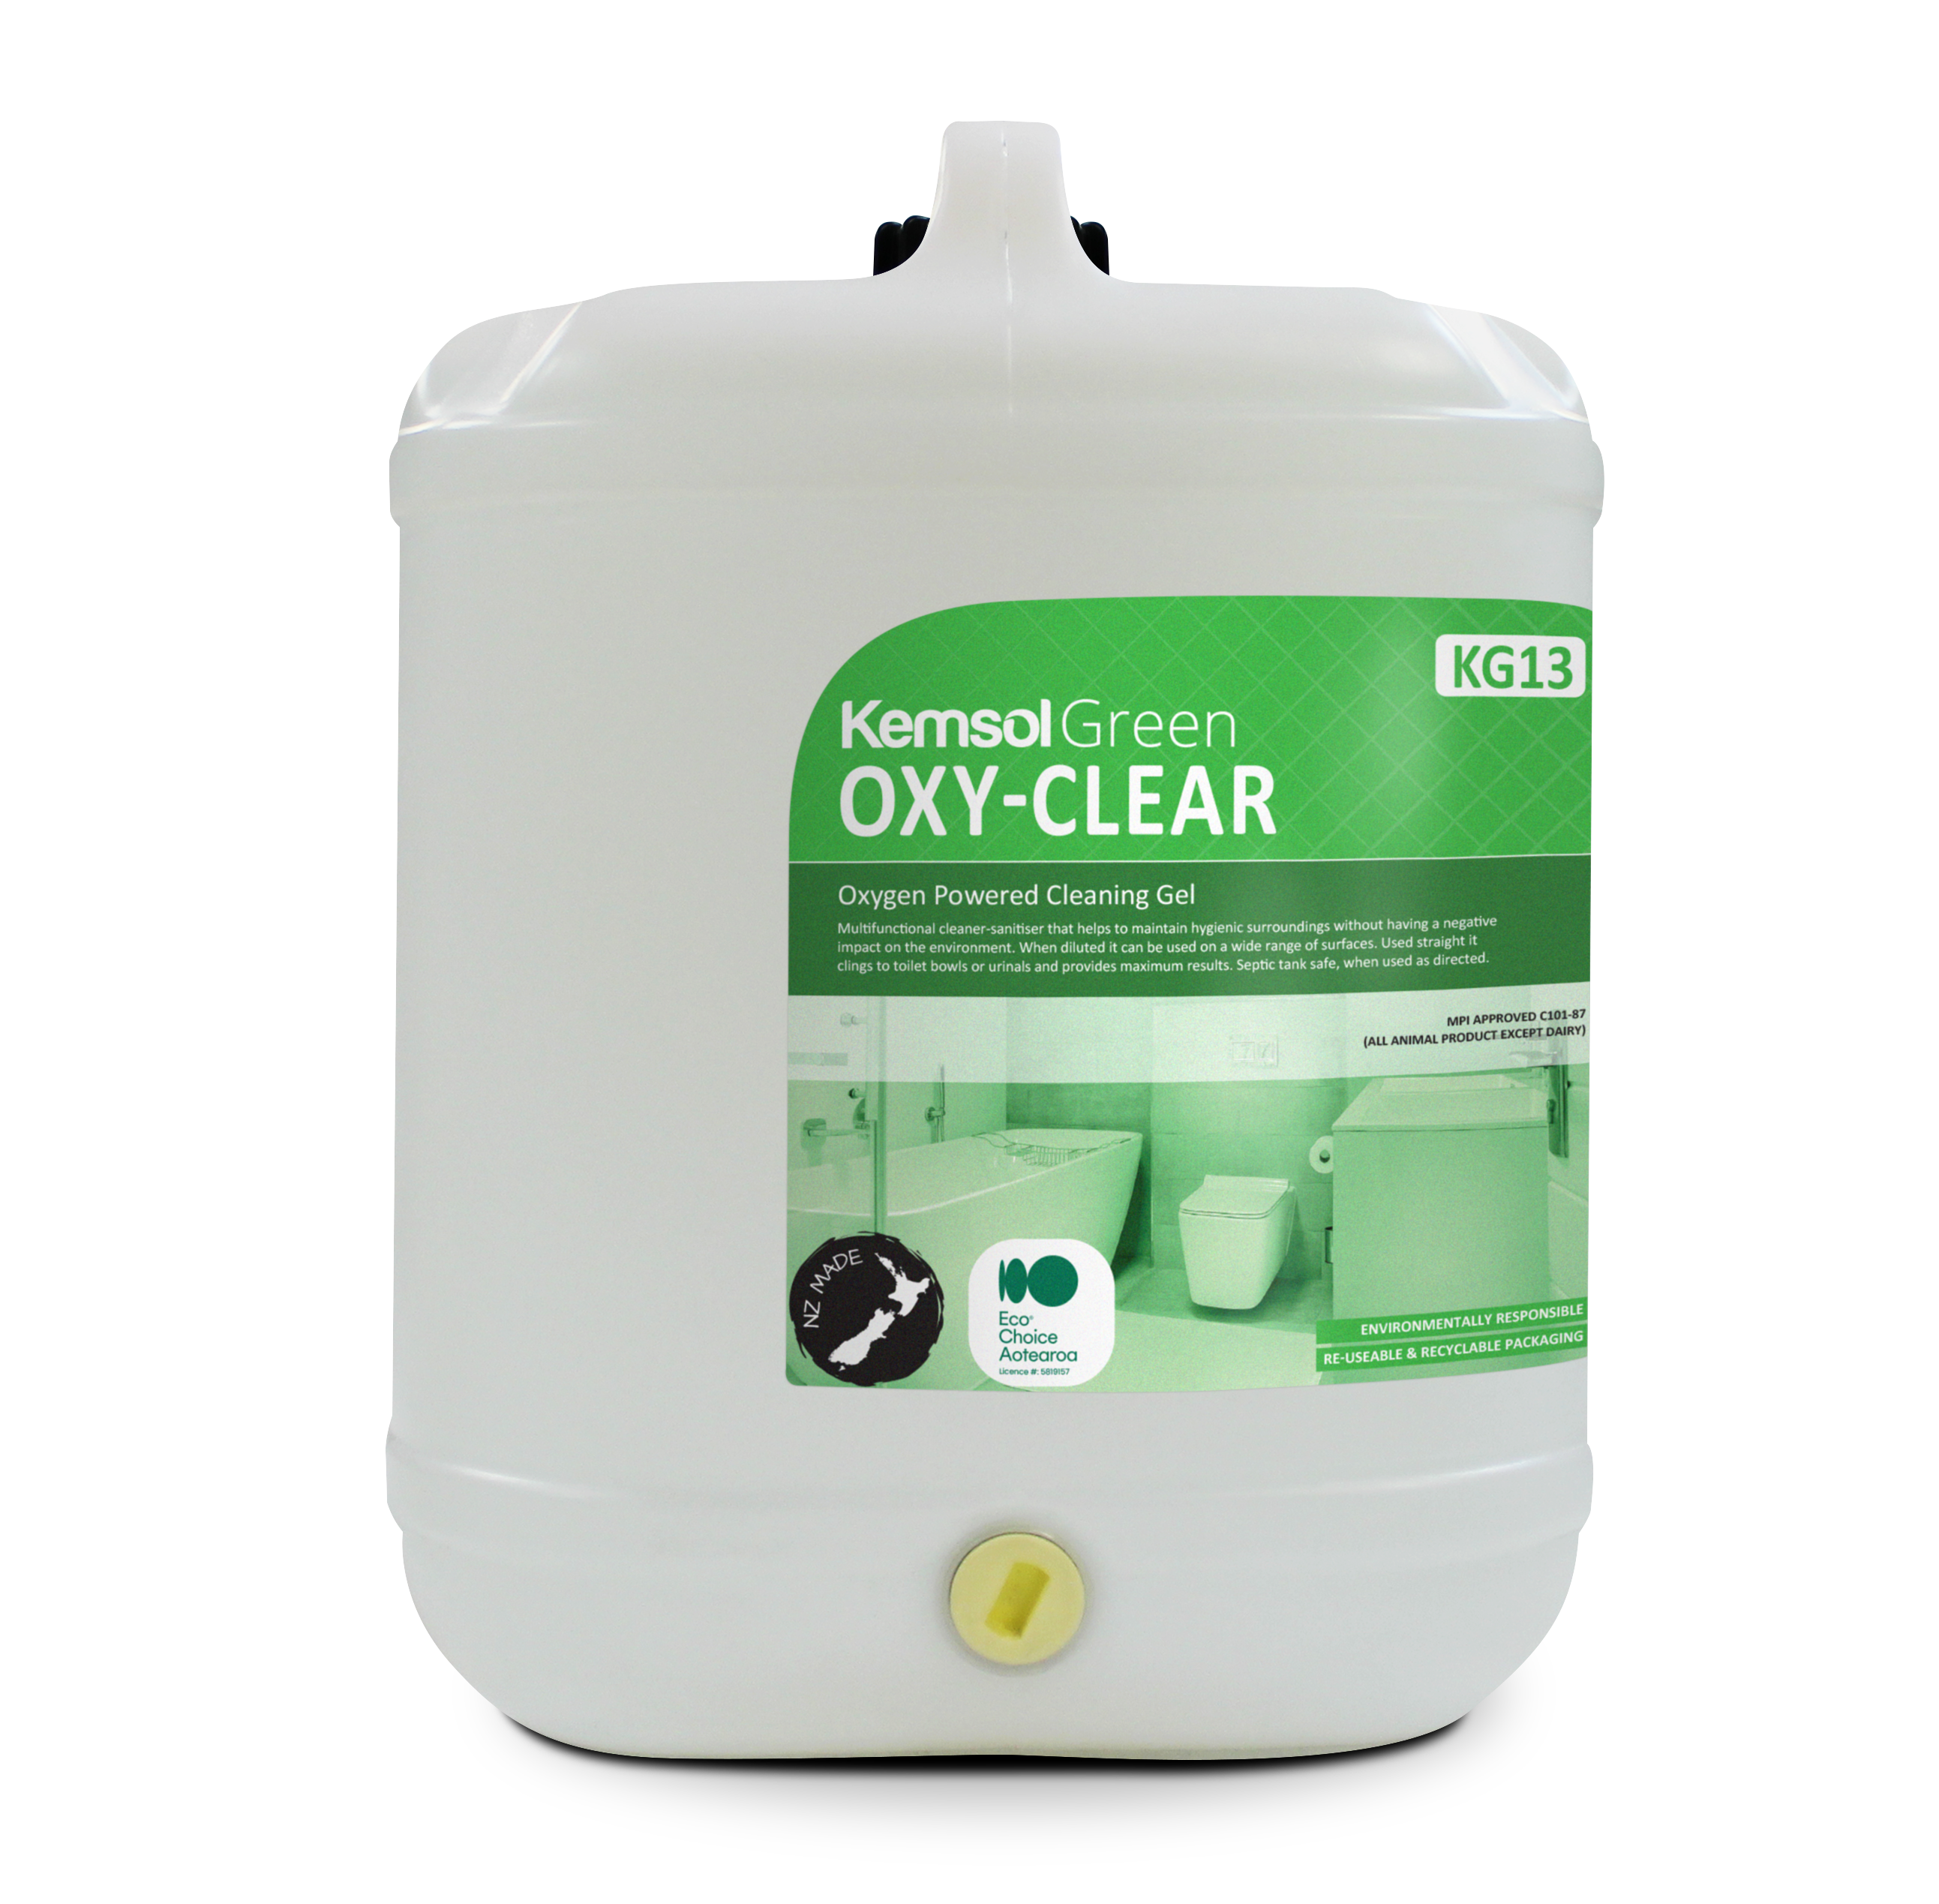 Xclear - A safe environment by disinfecting surfaces with Xclear.